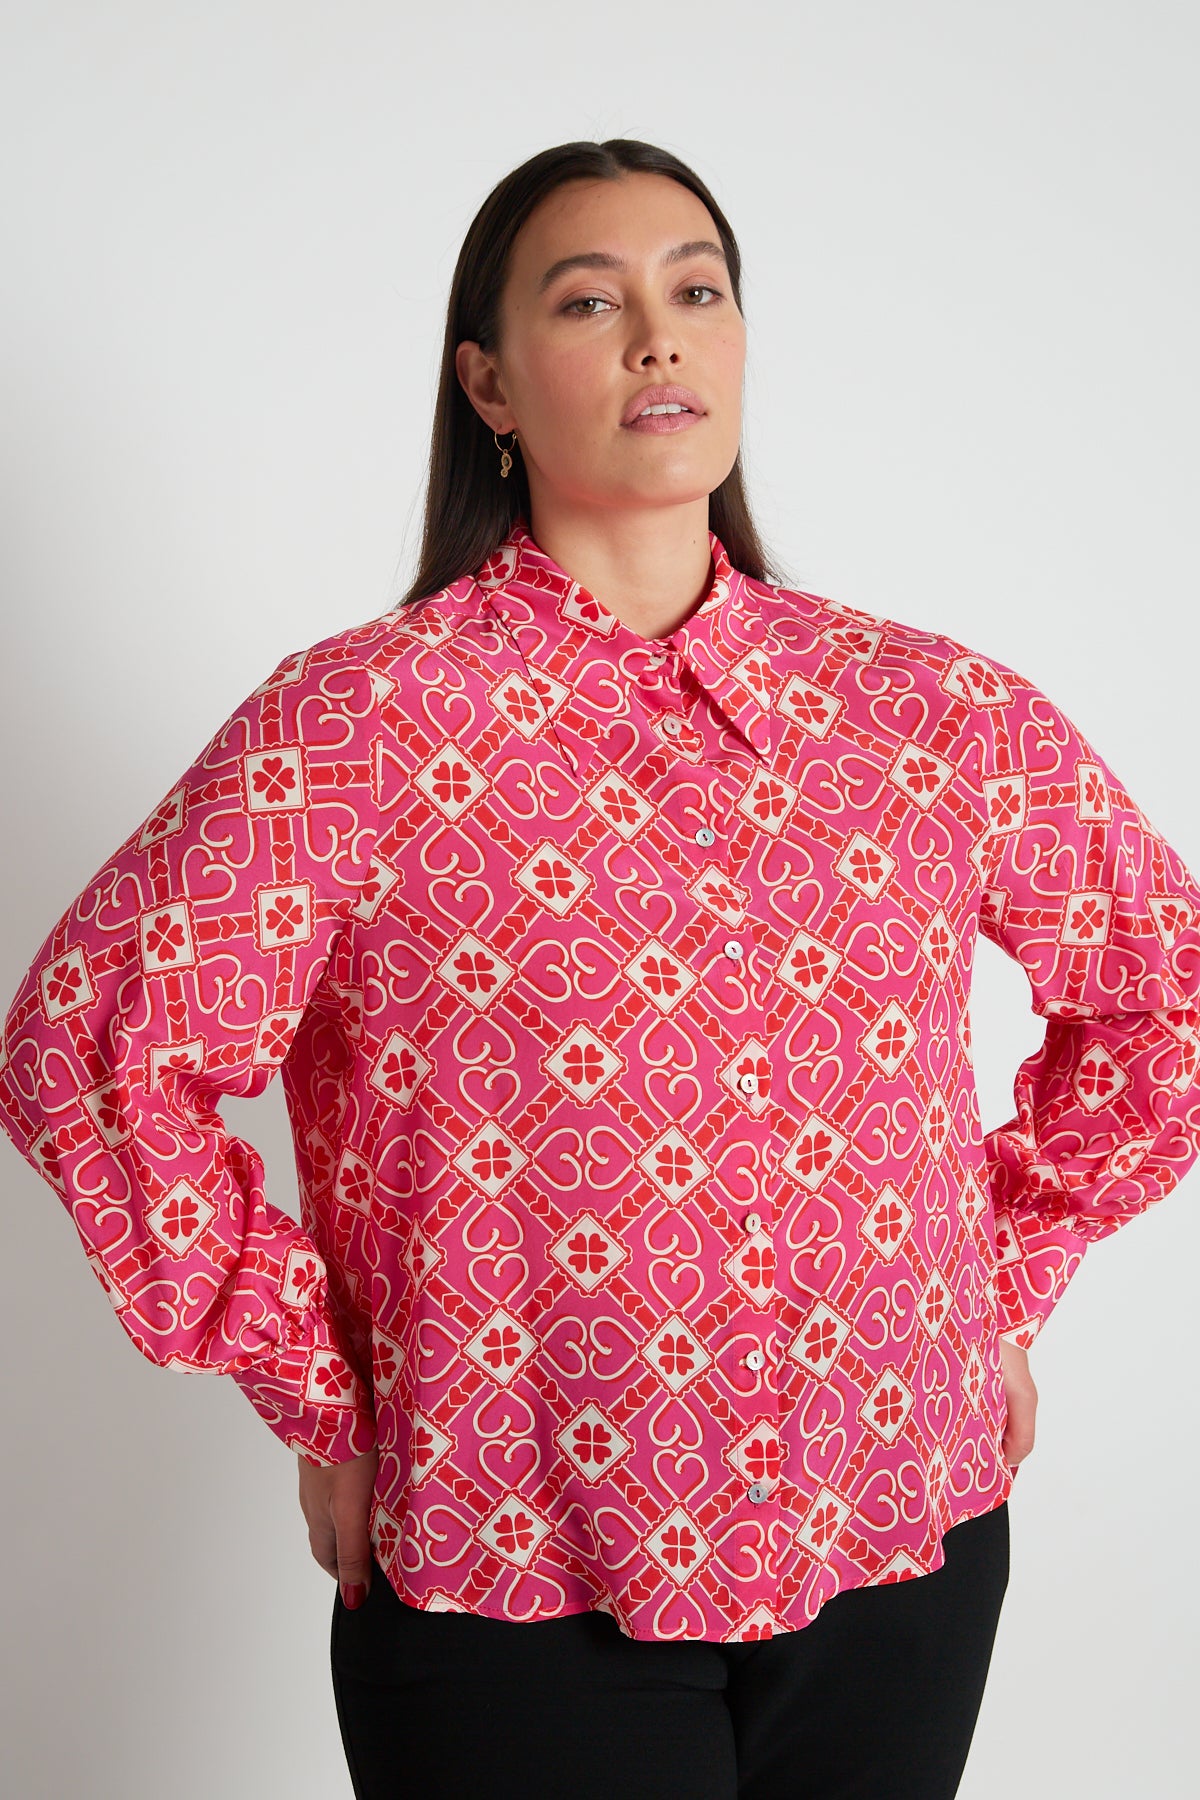 Unchained Melody shirt - Magenta